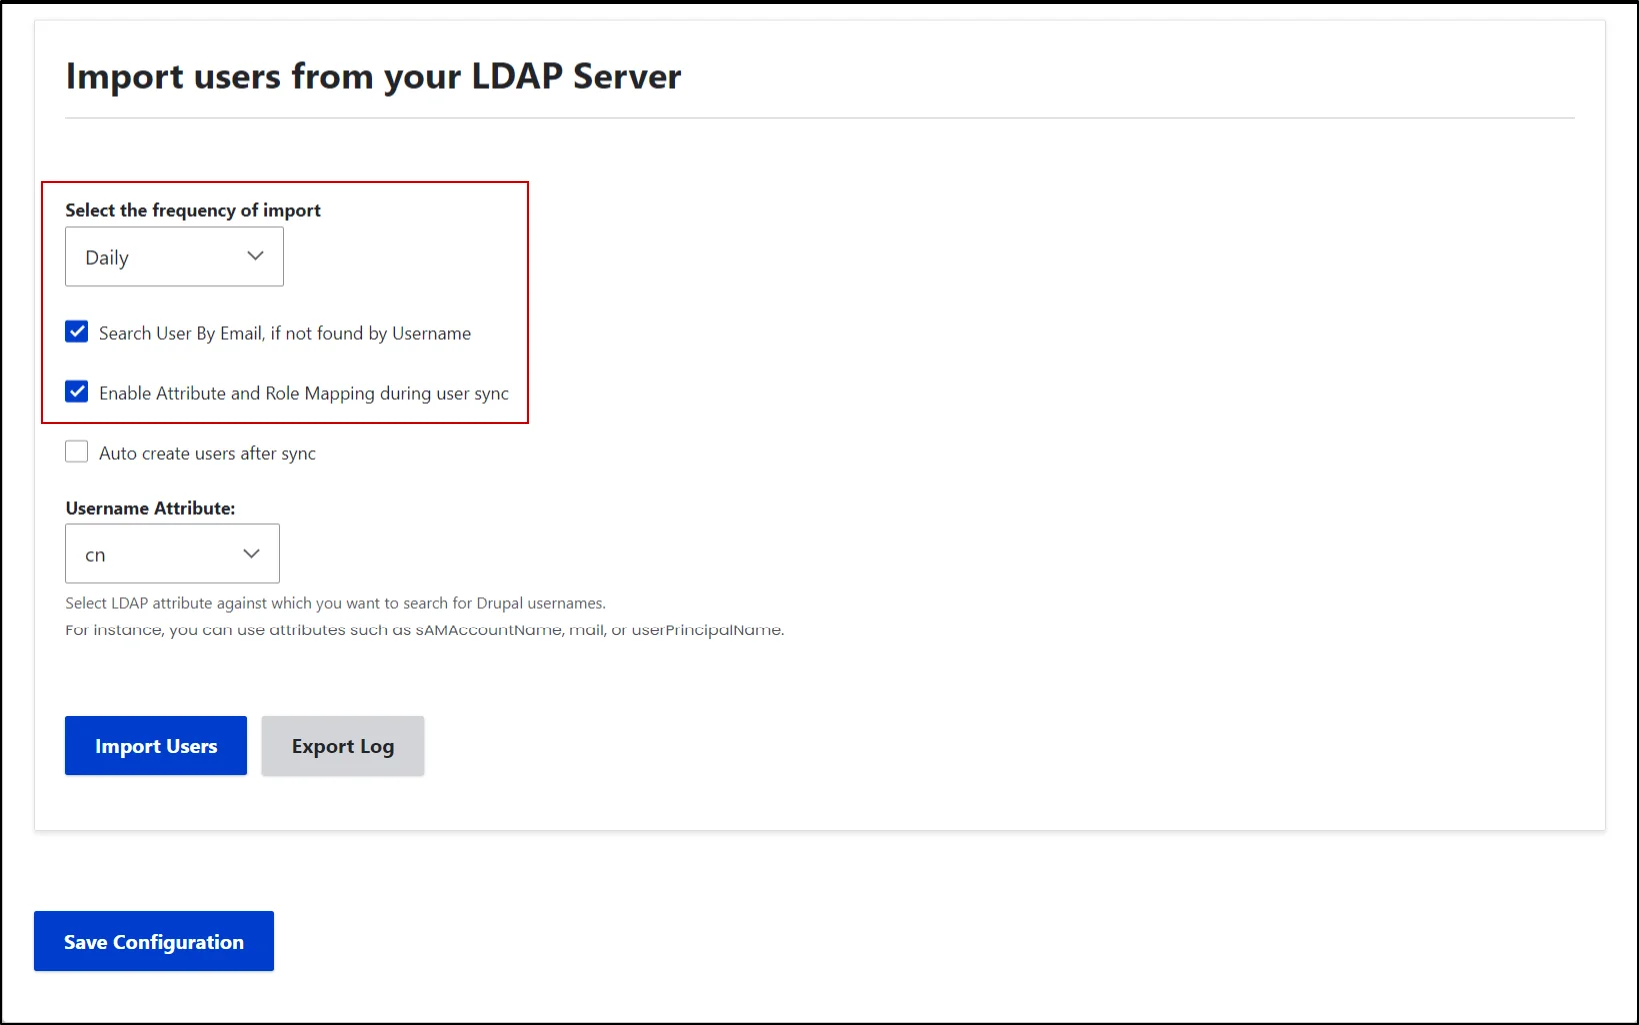 Import users from LDAP to Drupal - Enabling the checkbox of Enable Attribute and Role Mapping